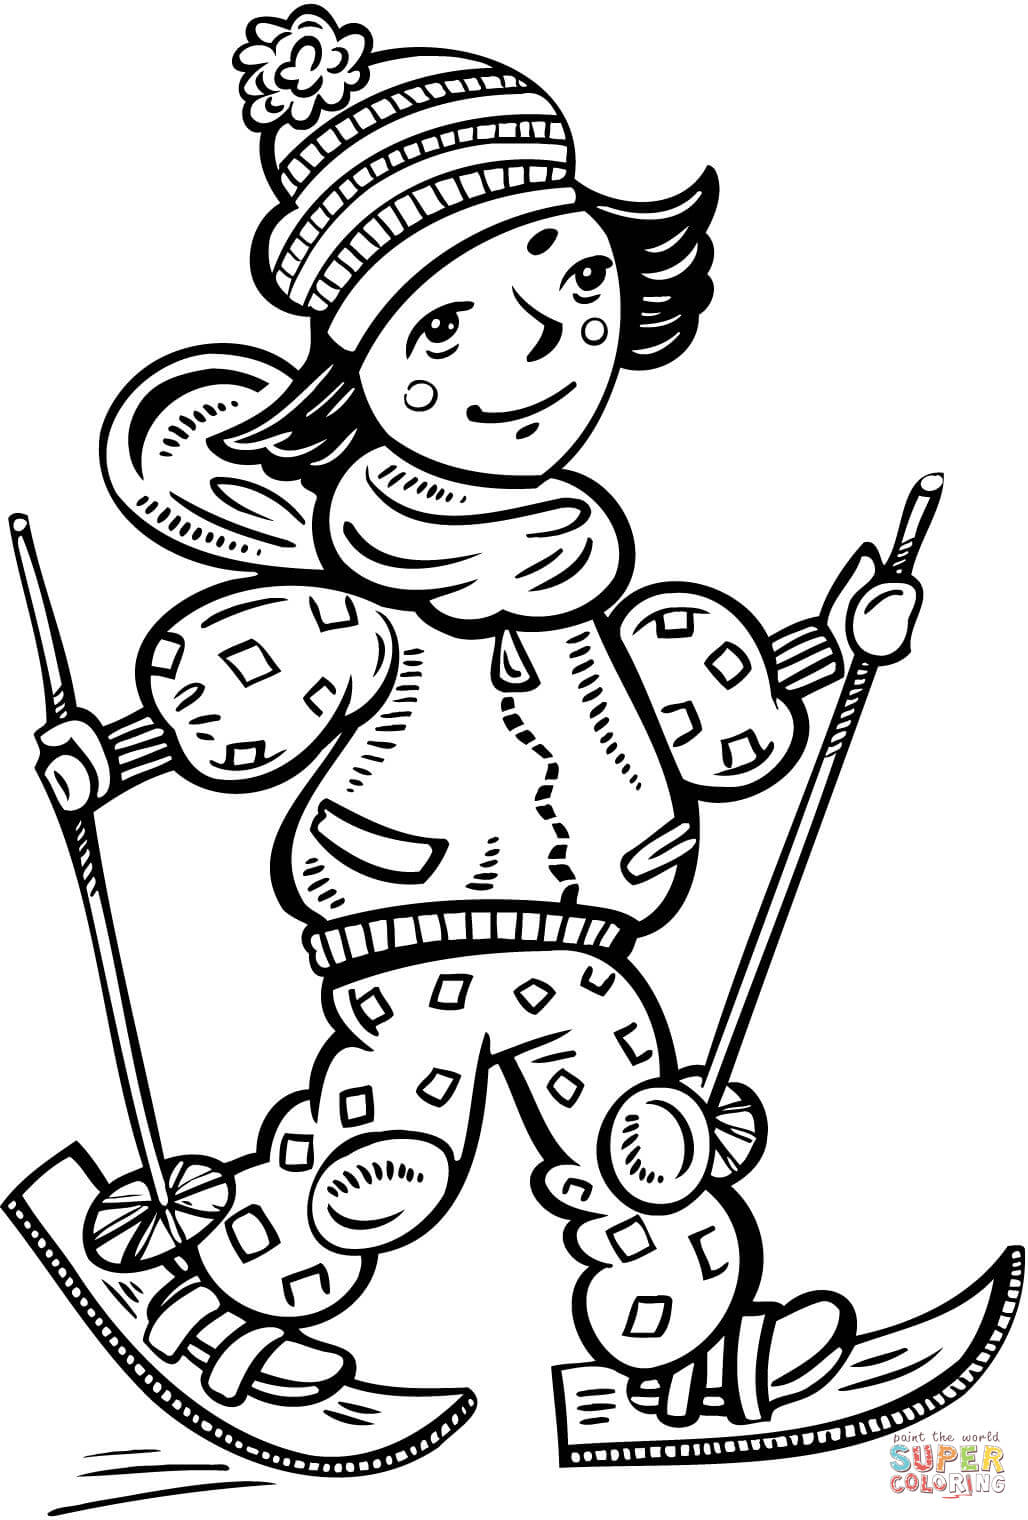 Girl Cross Country Skiing coloring page | Free Printable Coloring ...